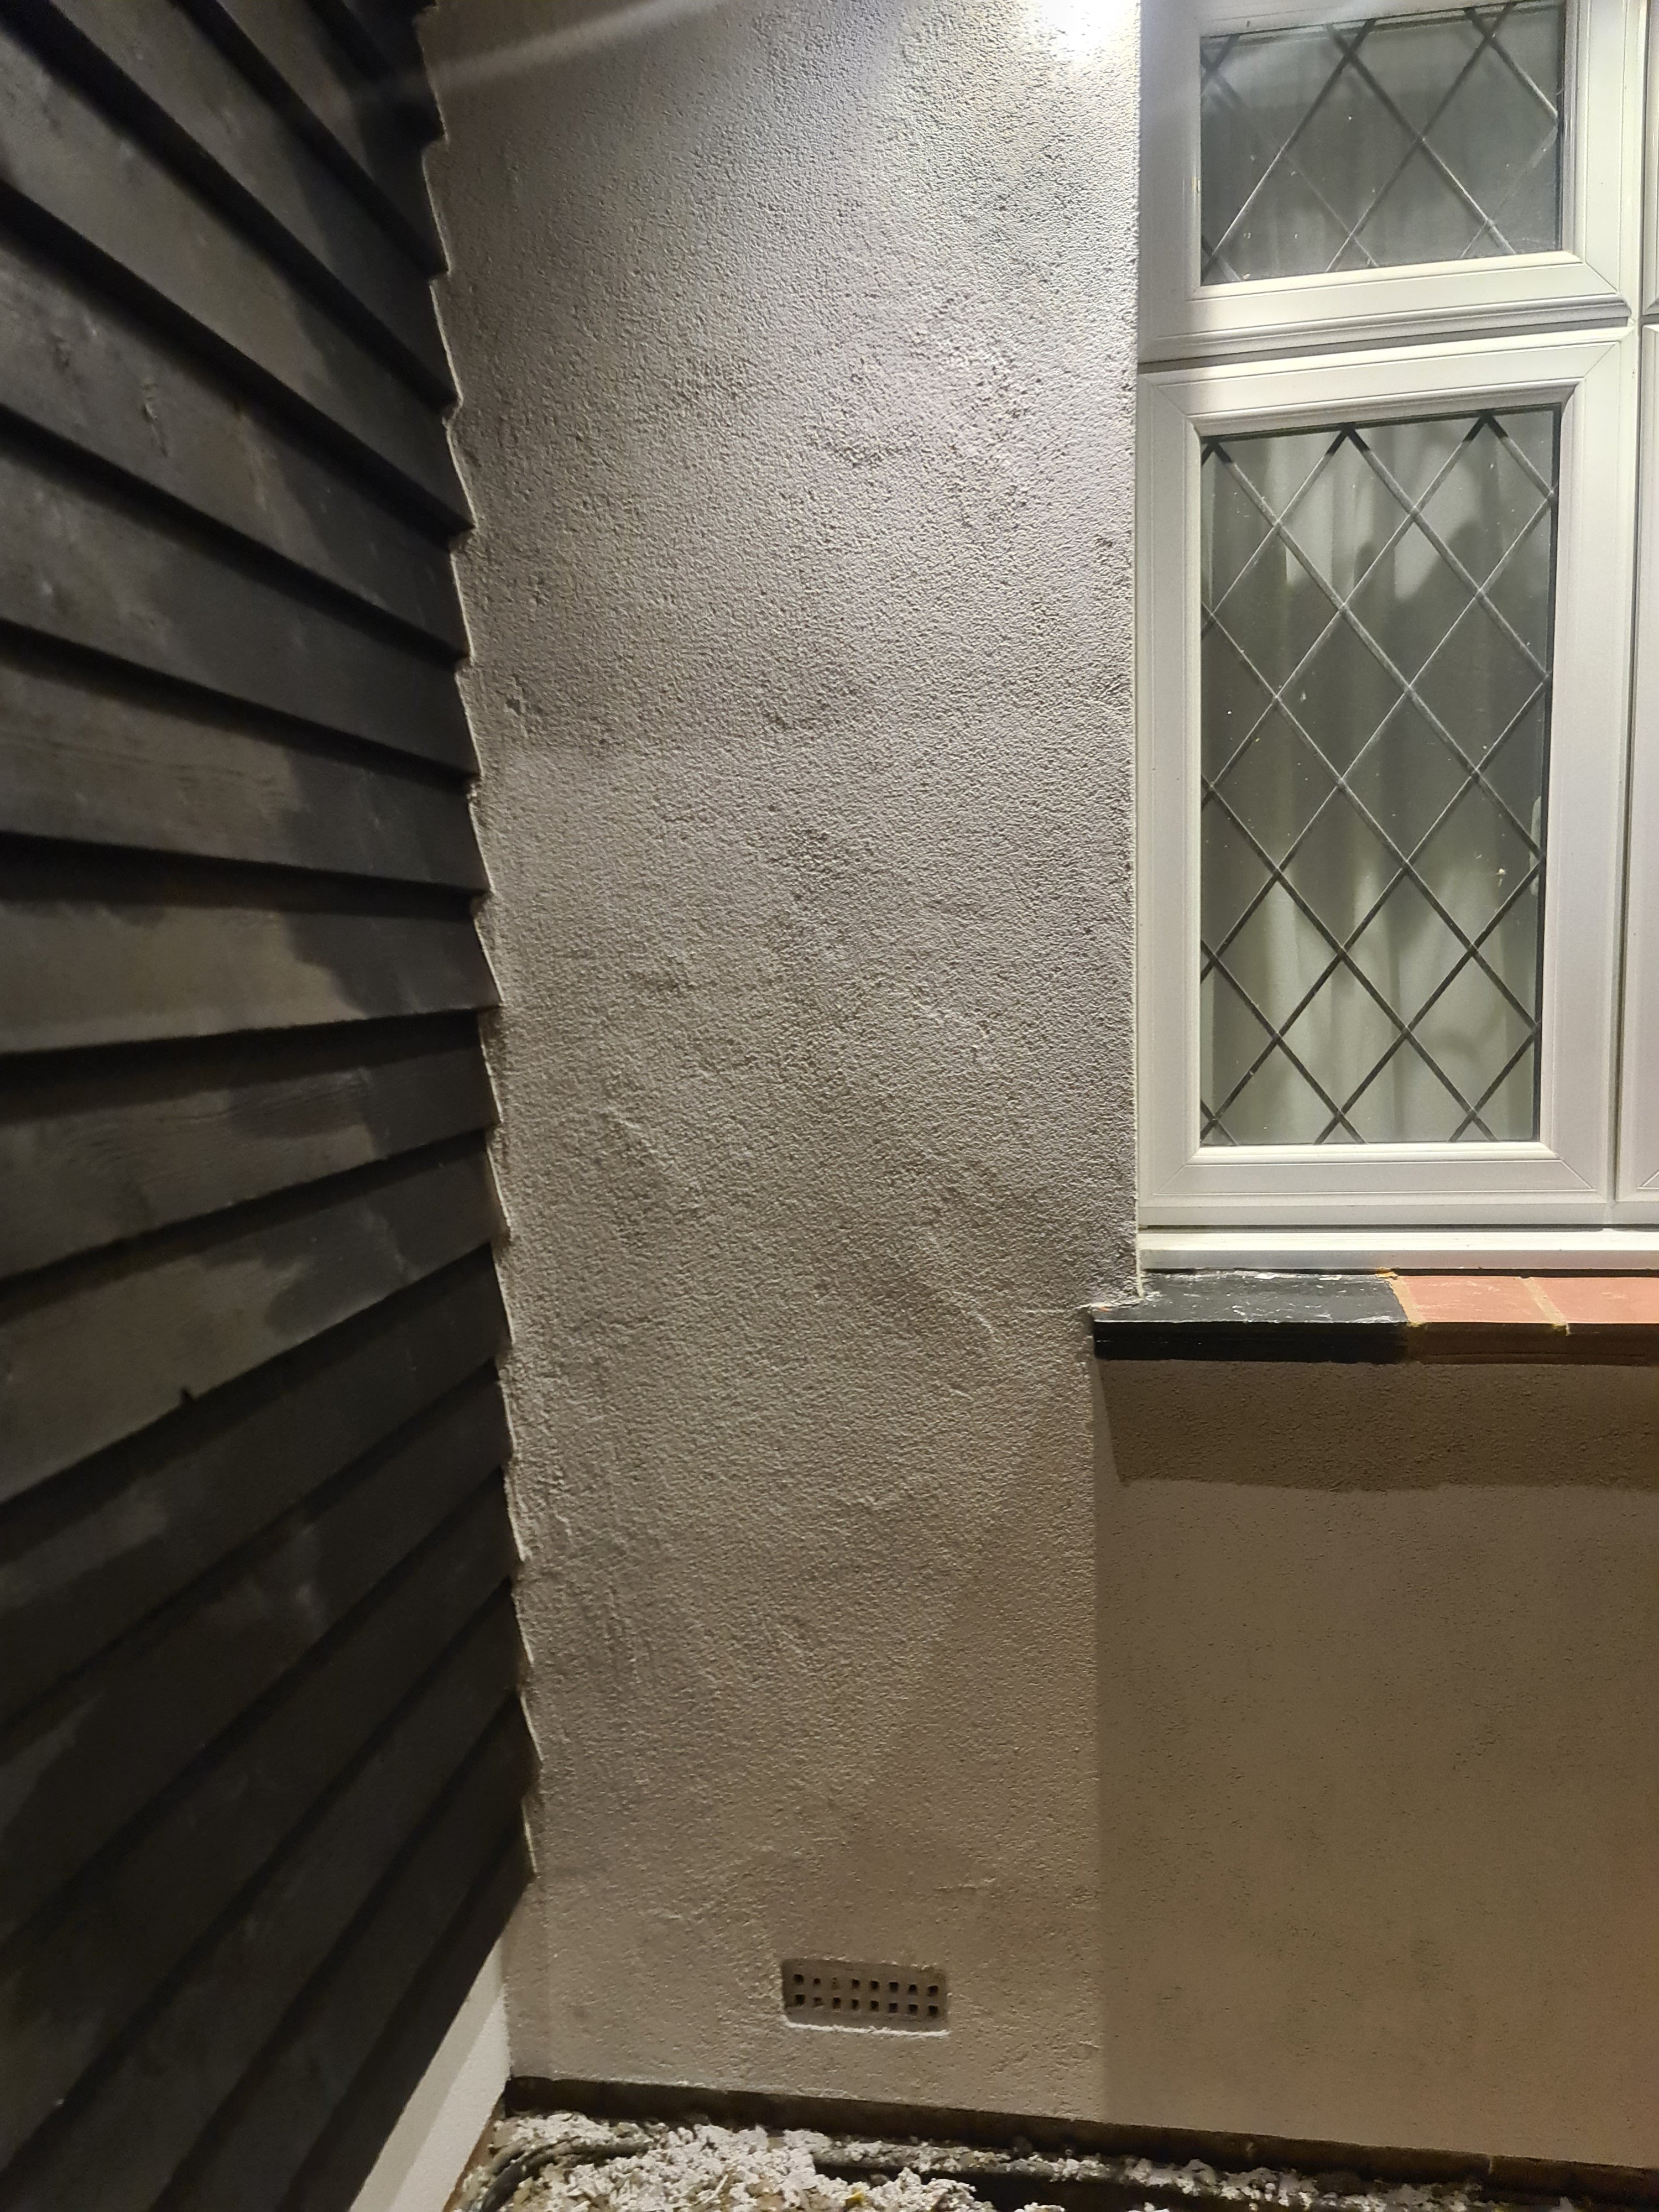 Silicone render looks terrible especially at night